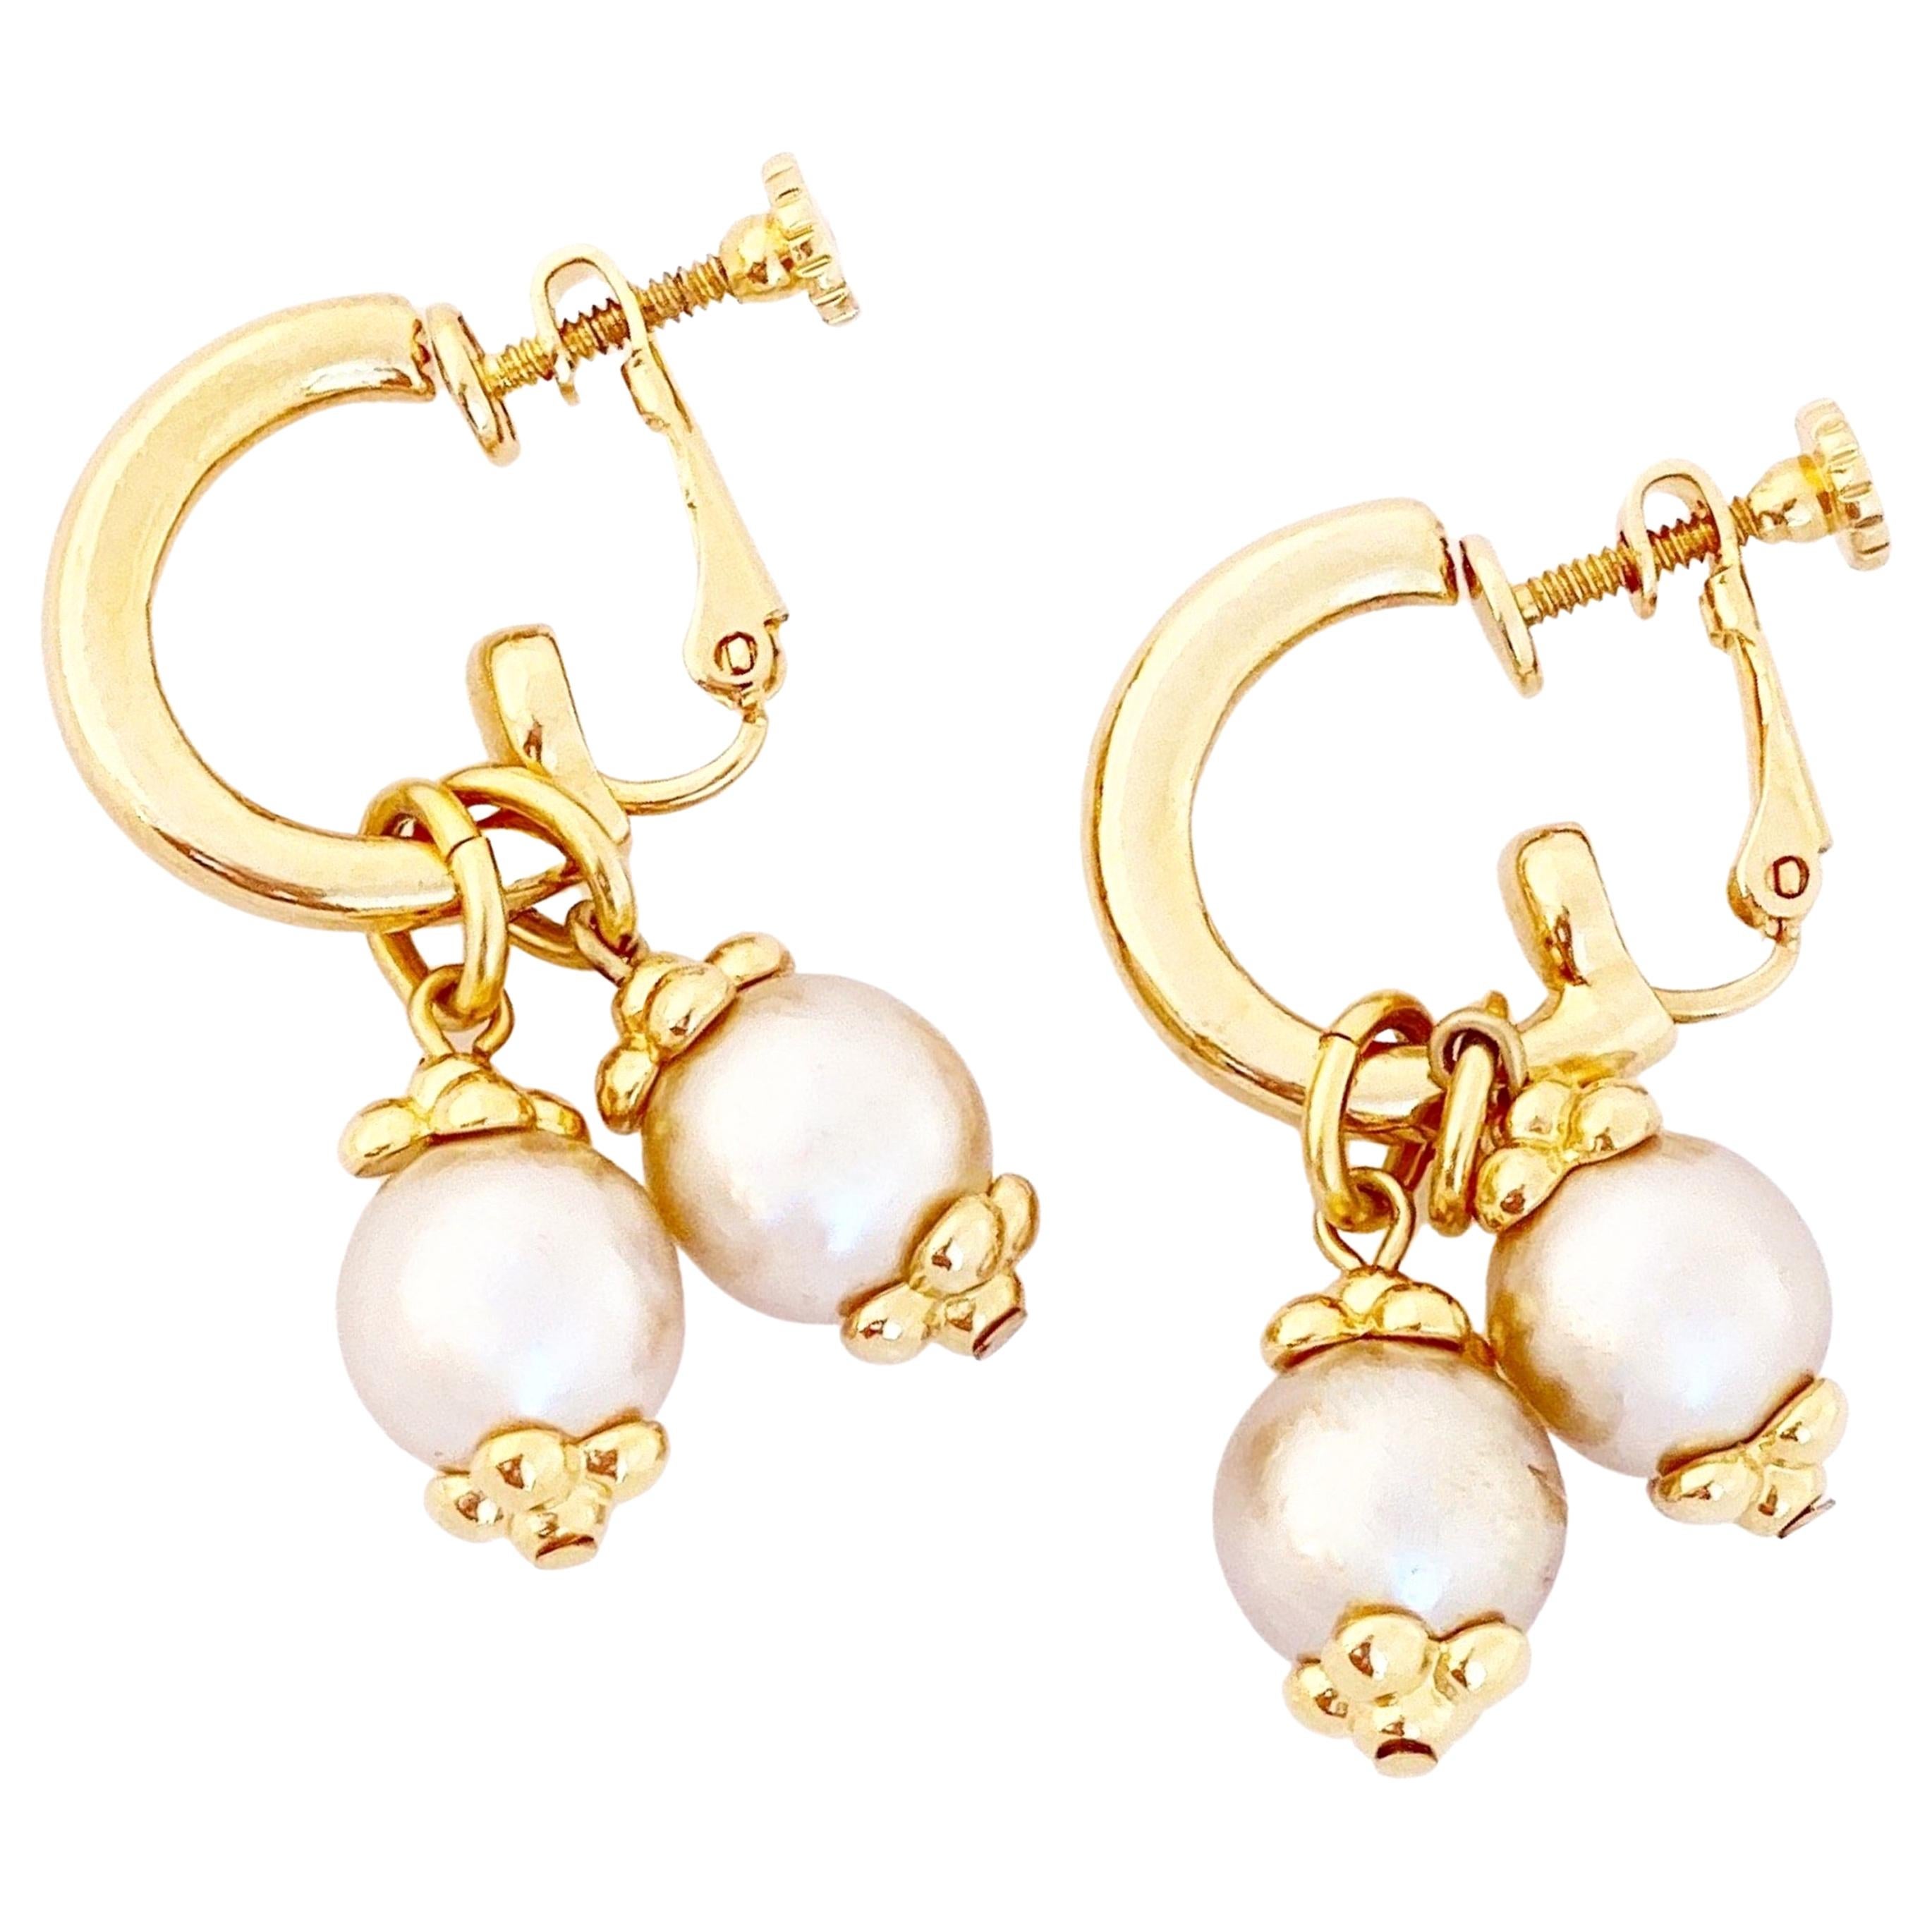 Gold Hoop Earrings With Pearl Charms By Joan Rivers, 1990s